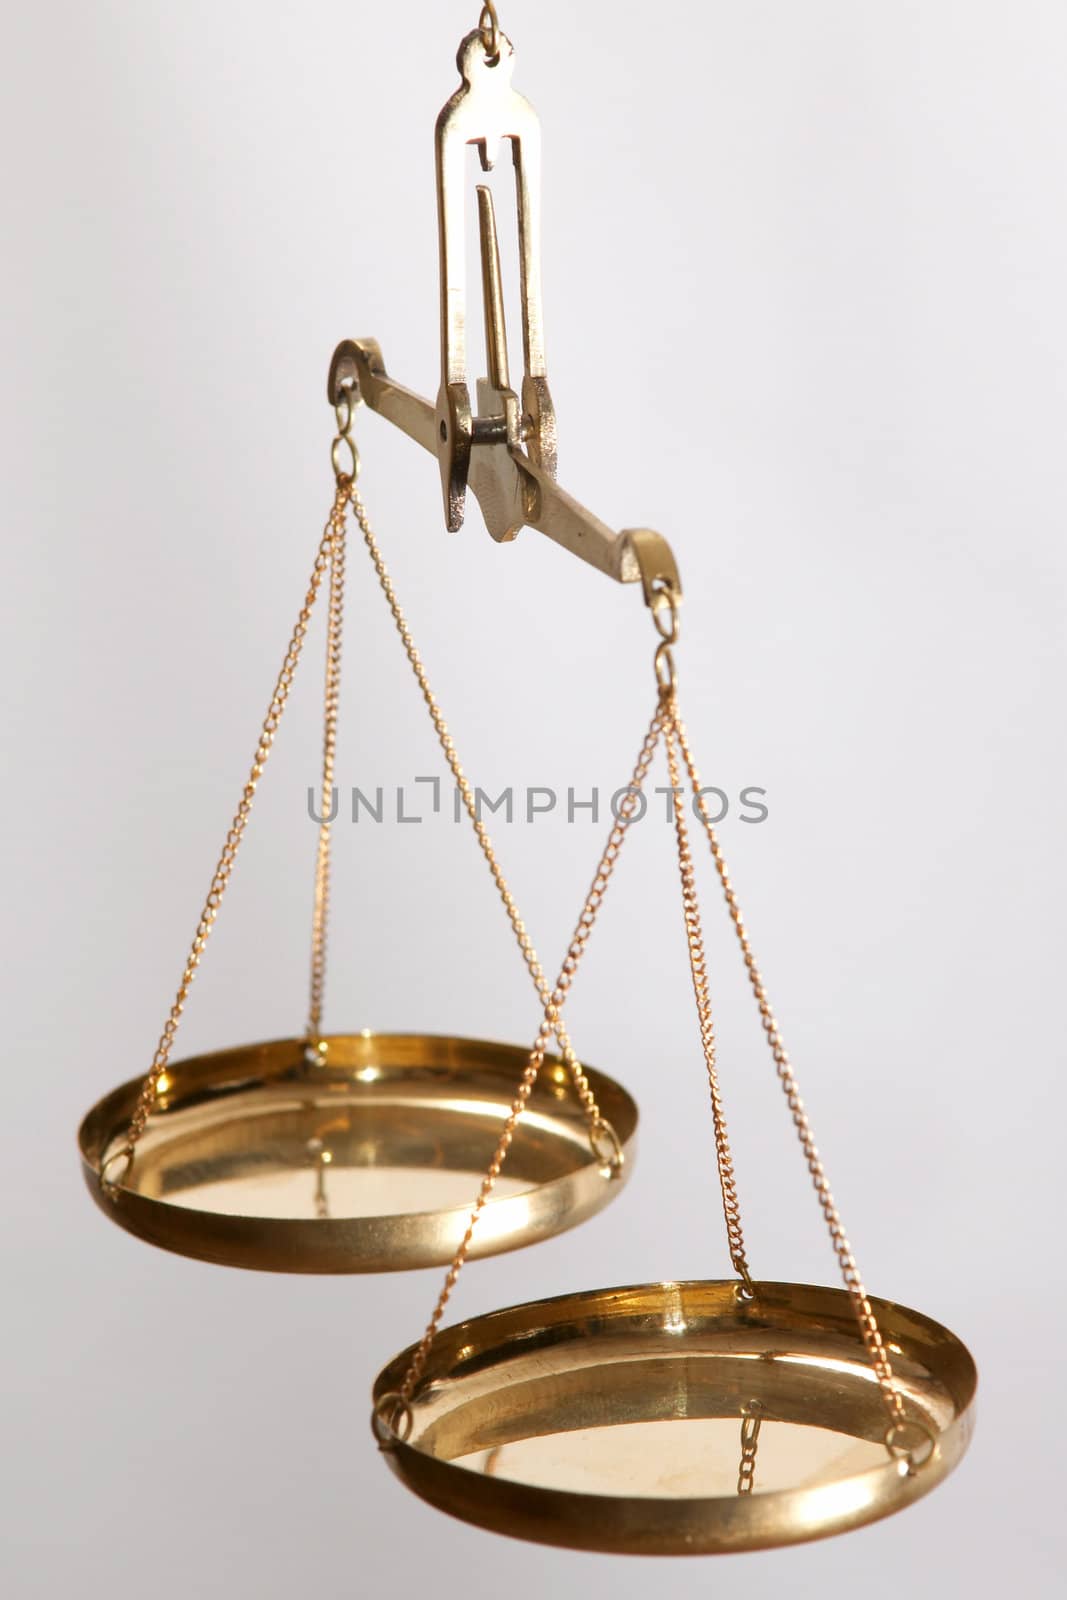 A picture of golden jewelry scales